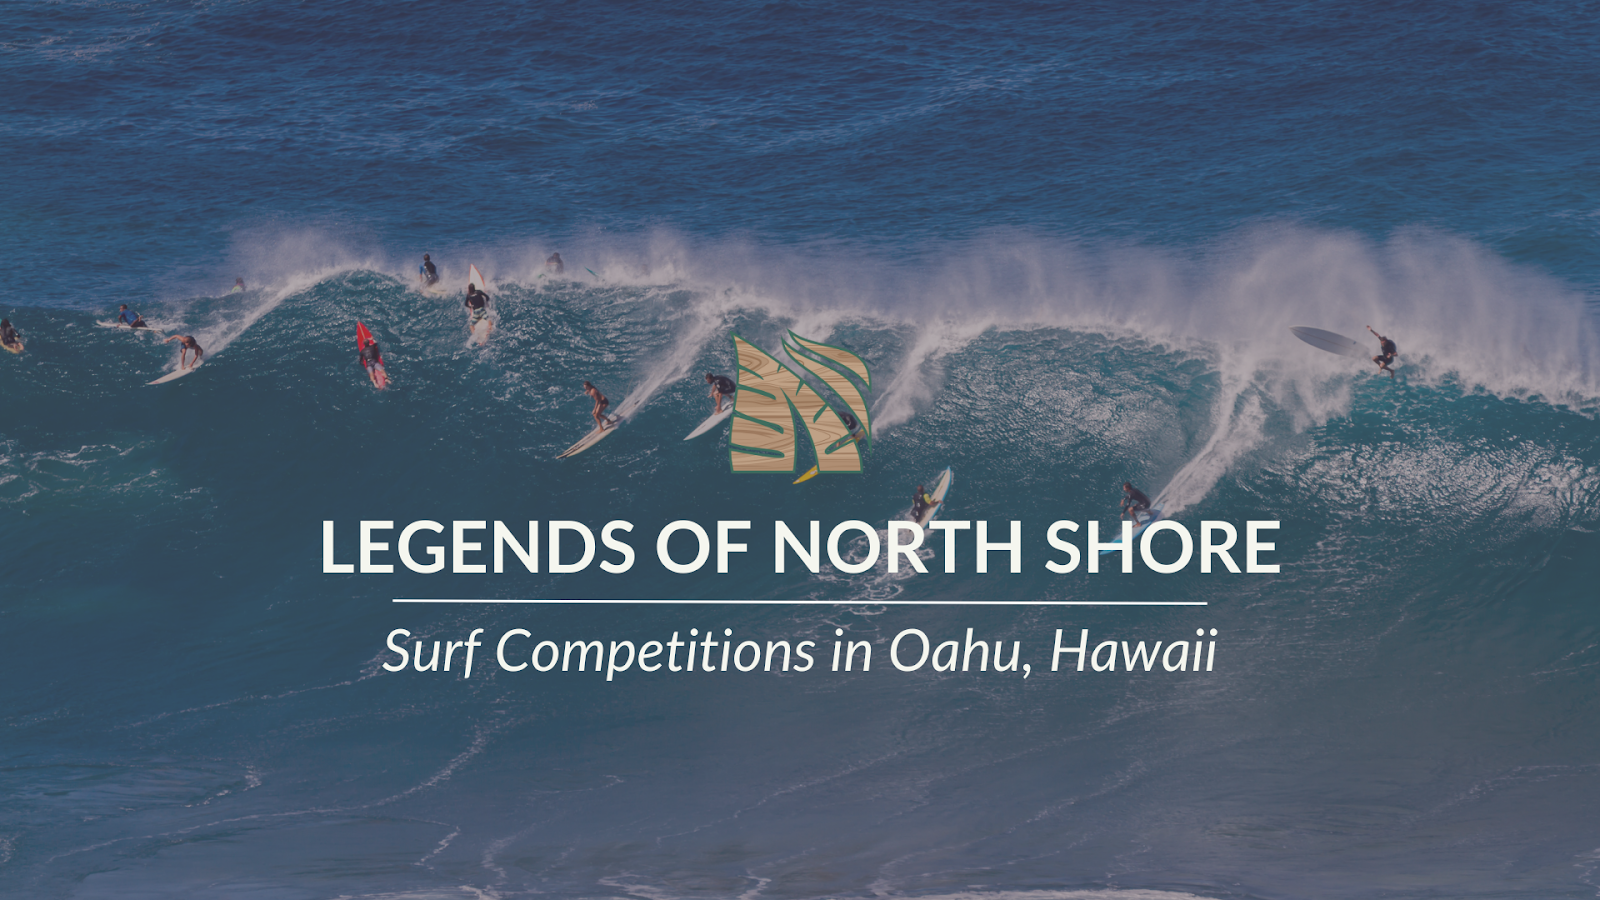 Legends of North Shore: Surfing Competitions in Oahu, Hawaii. History and future surfing competition dates.